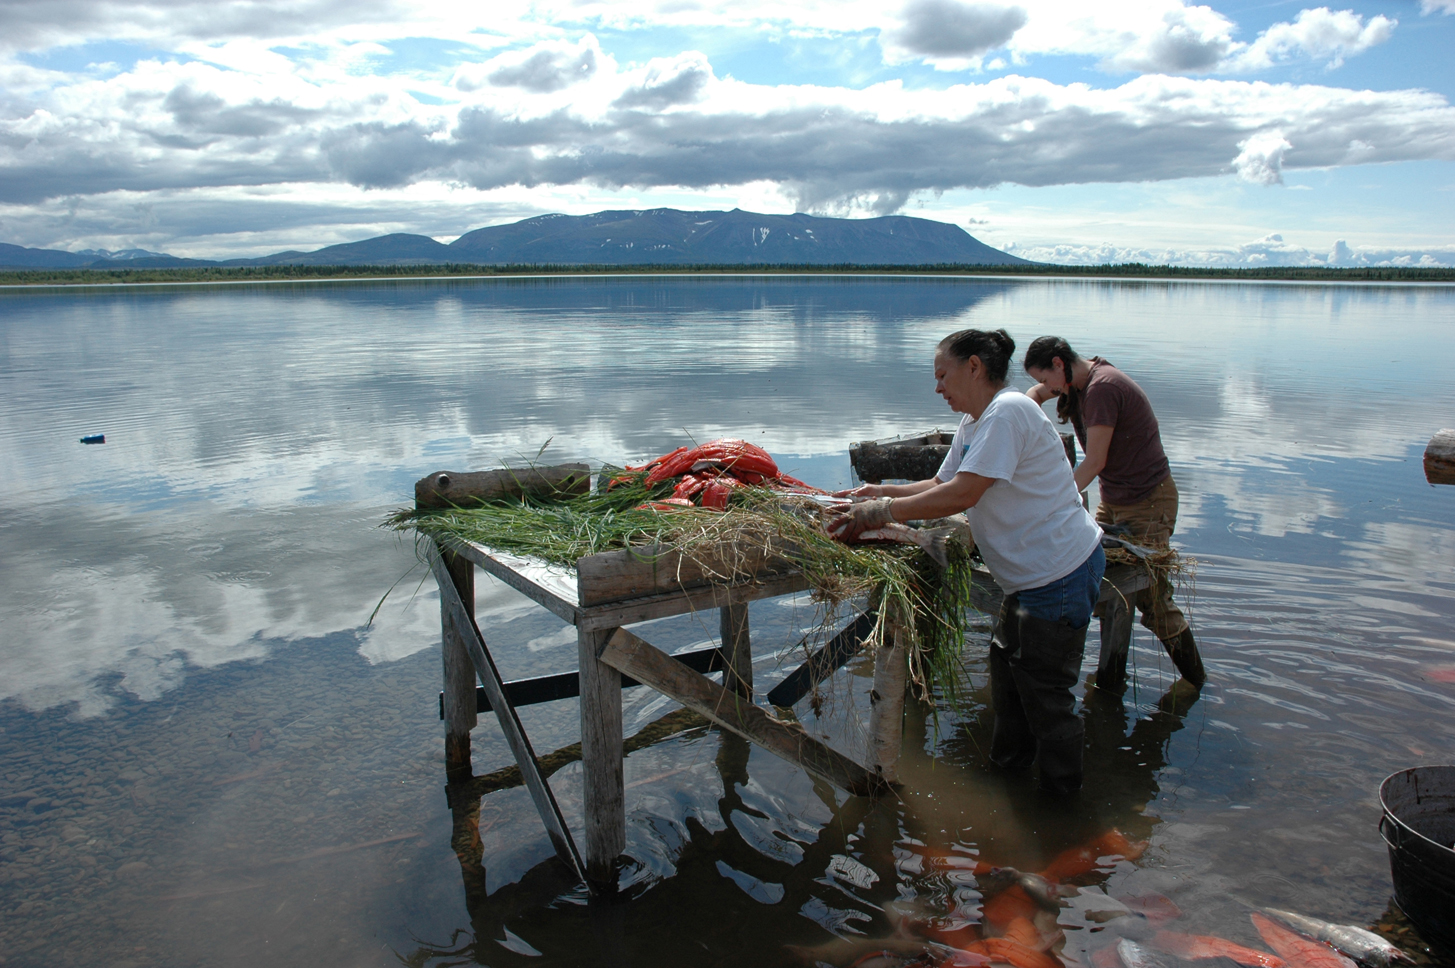 Above, Nancy Delkittie, left, and Jessica Hay process salmon at a fish camp. Top, a map shows Dena’ina country.-Photo by Robin La Vine, Alaska Department of Fish and Game